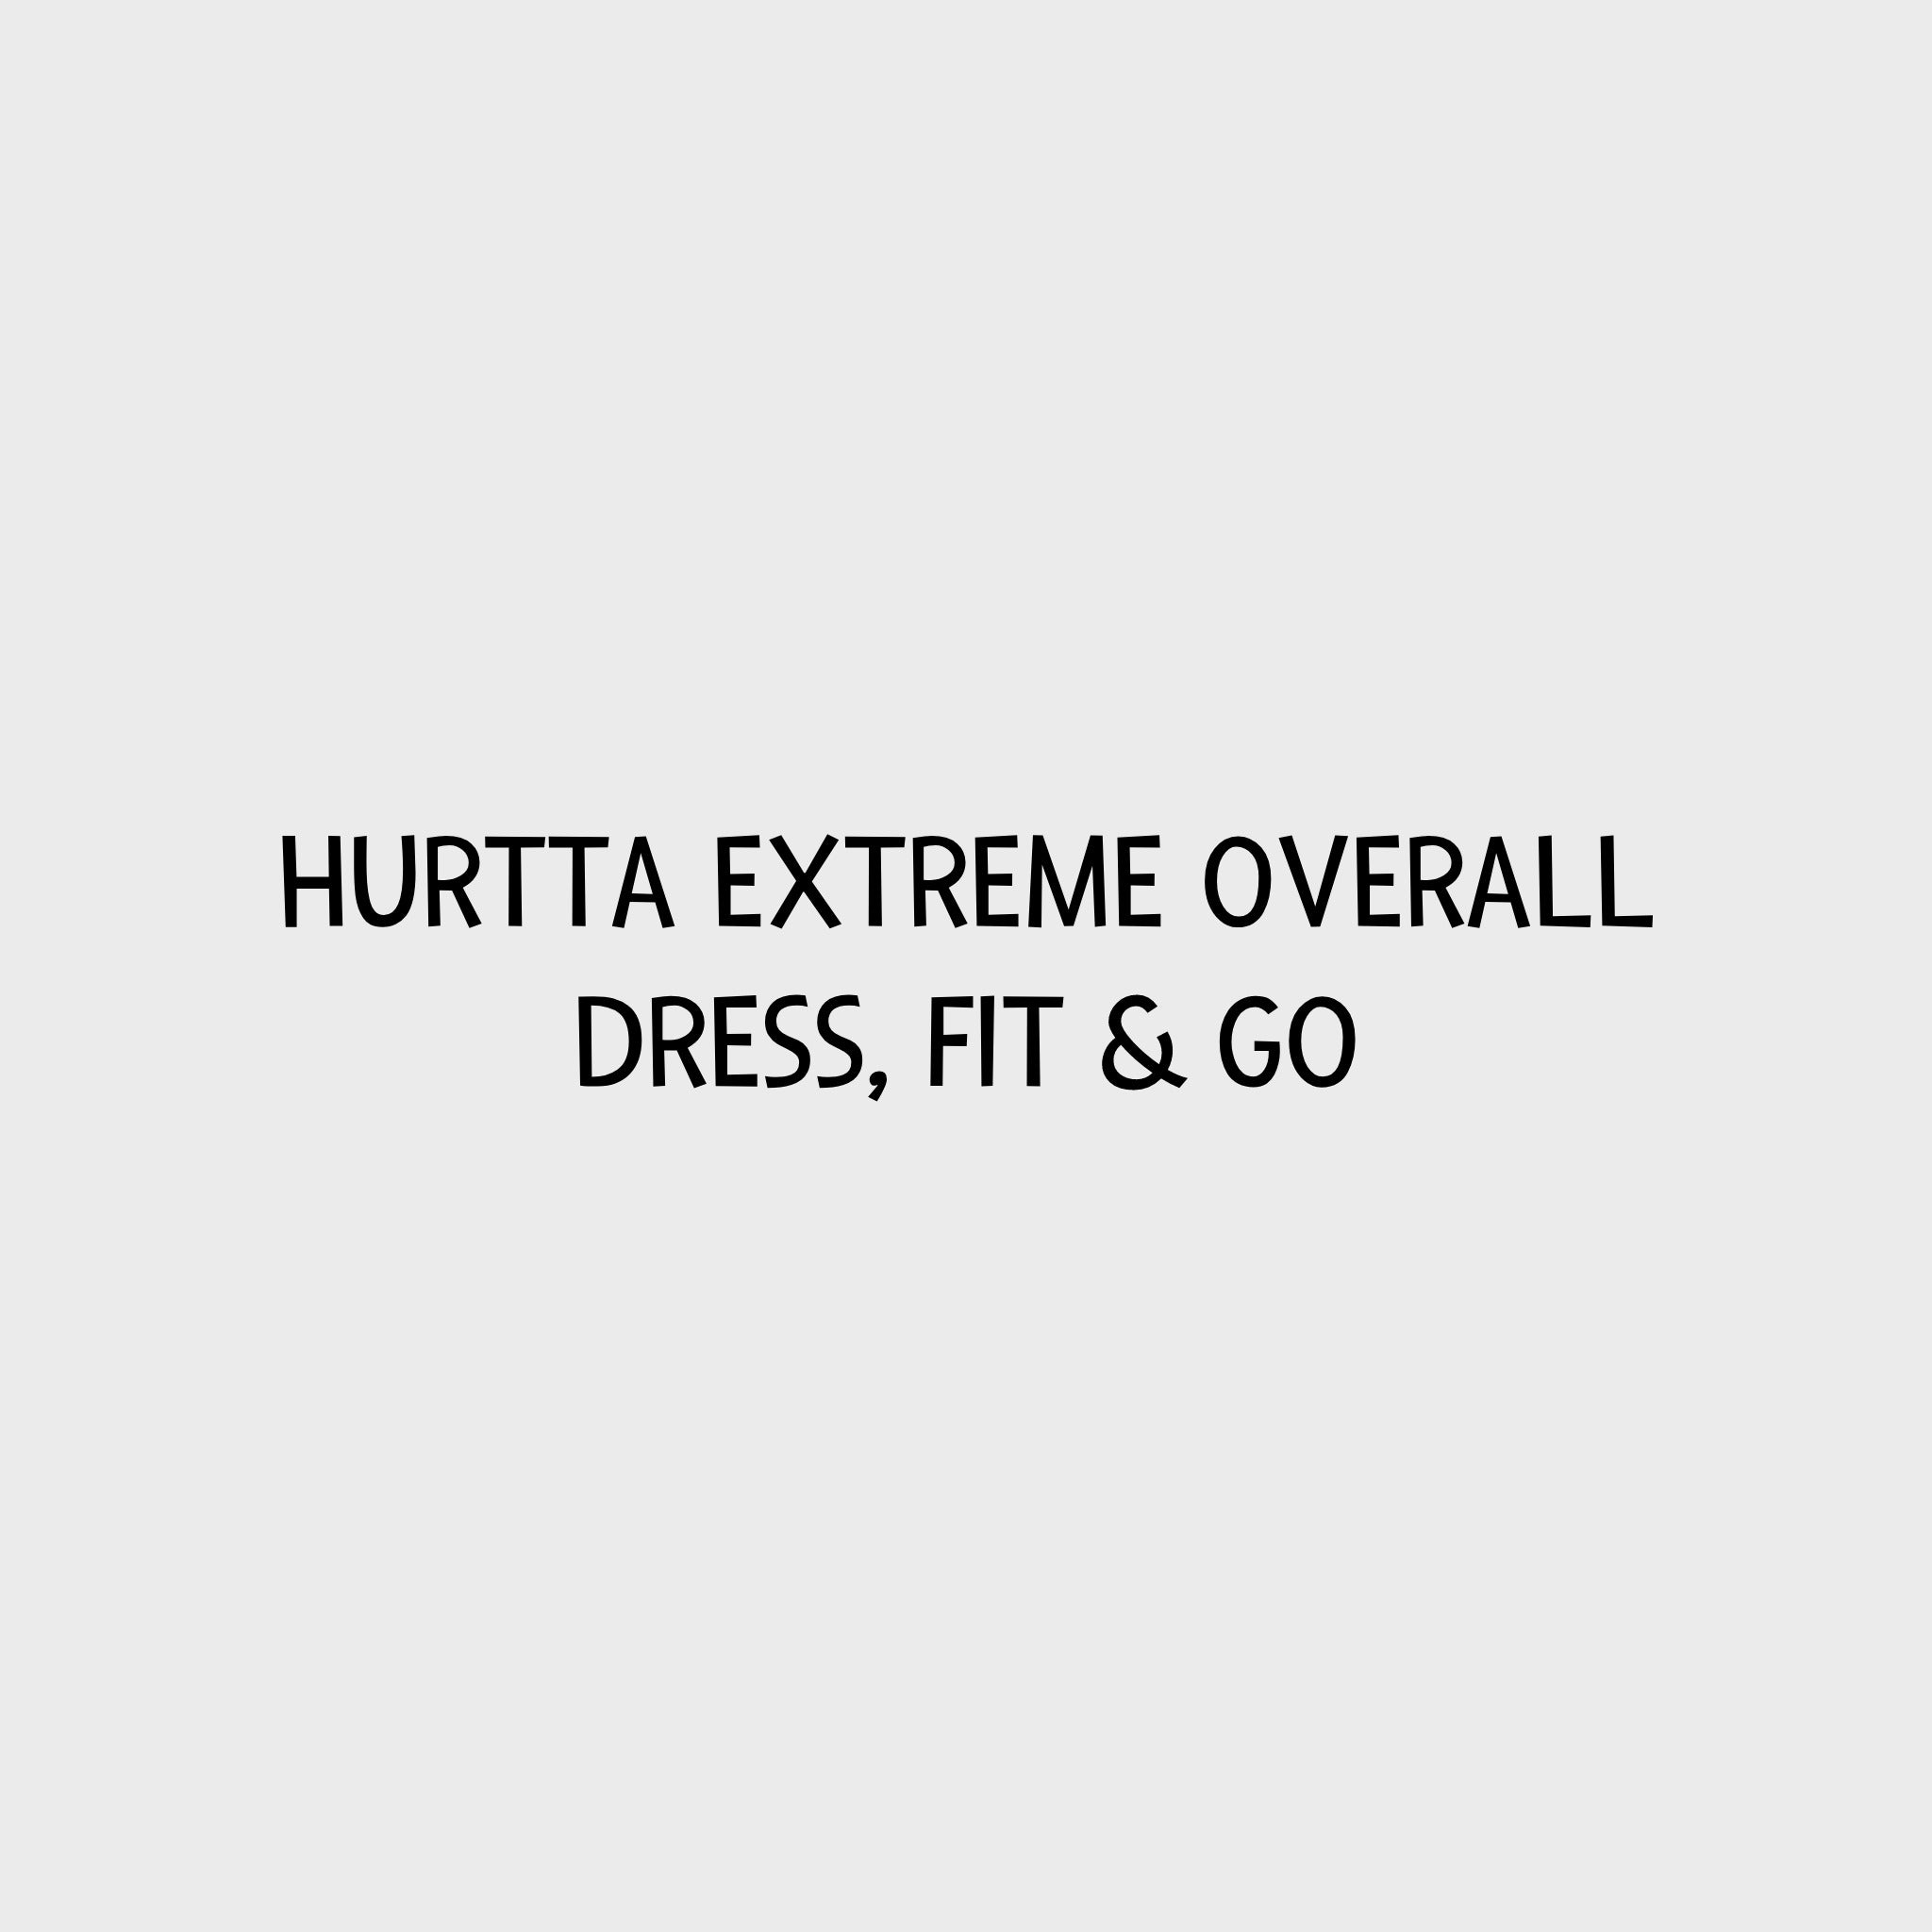 Video - Hurtta Extreme Overall Dress, Fit & Go